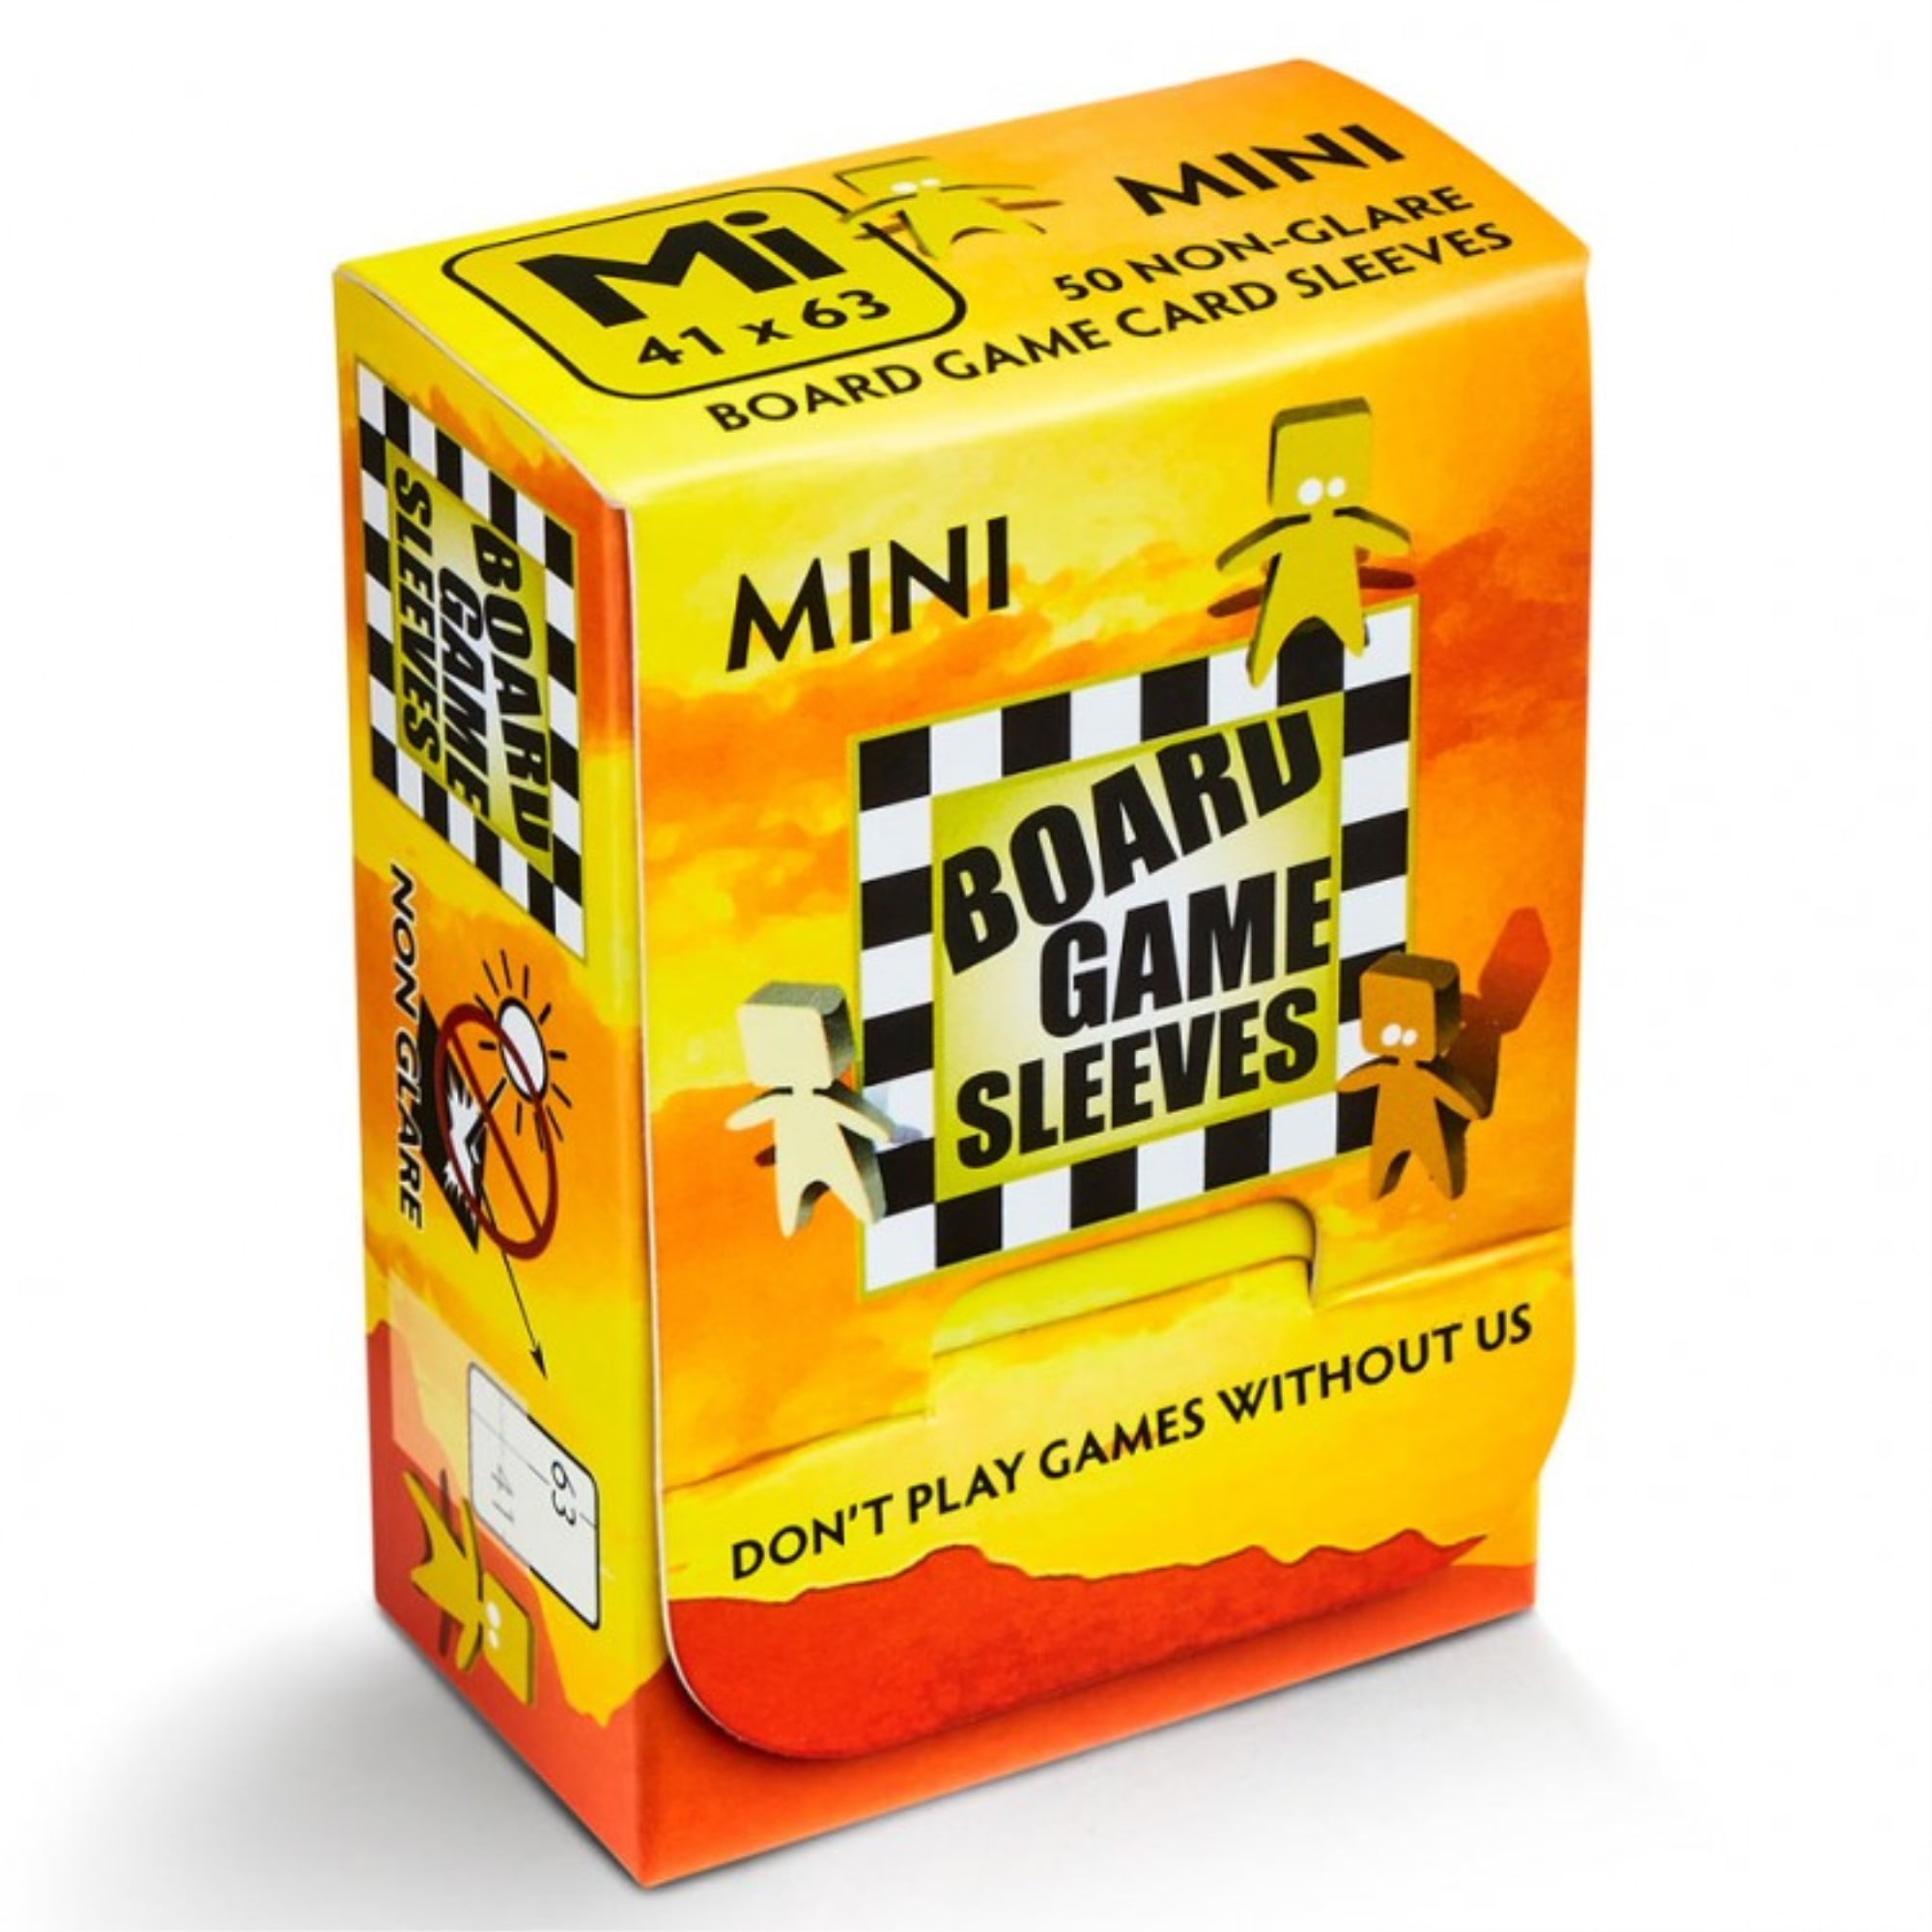 Picture of Arcane Tinmen ATM10425 DP Mini Board Game Sleeves Non Glare, Yellow - 100 Count